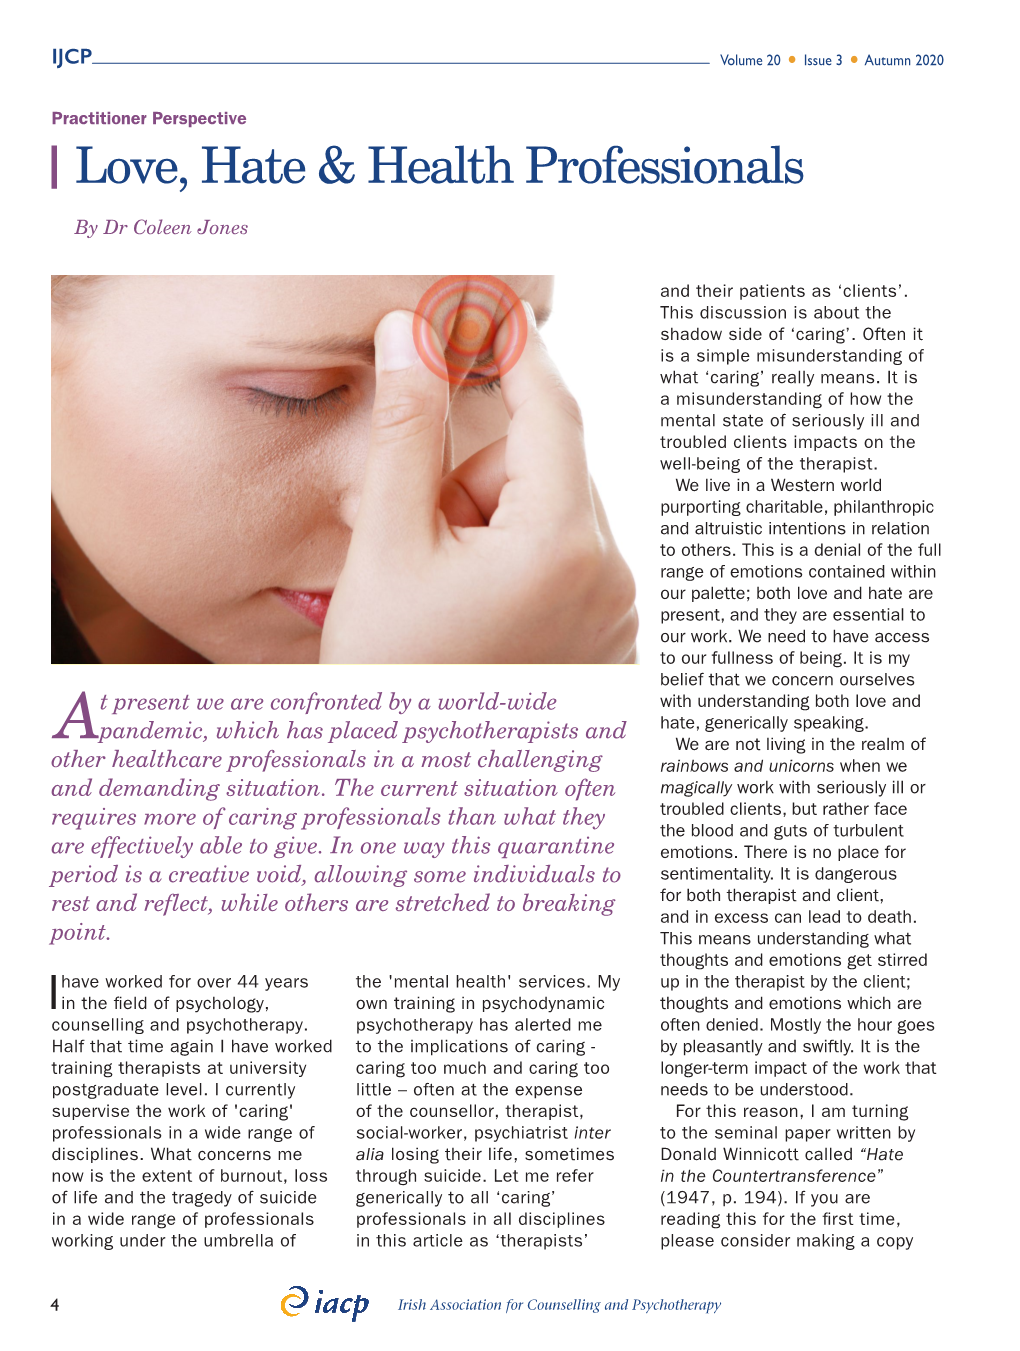 Love, Hate & Health Professionals